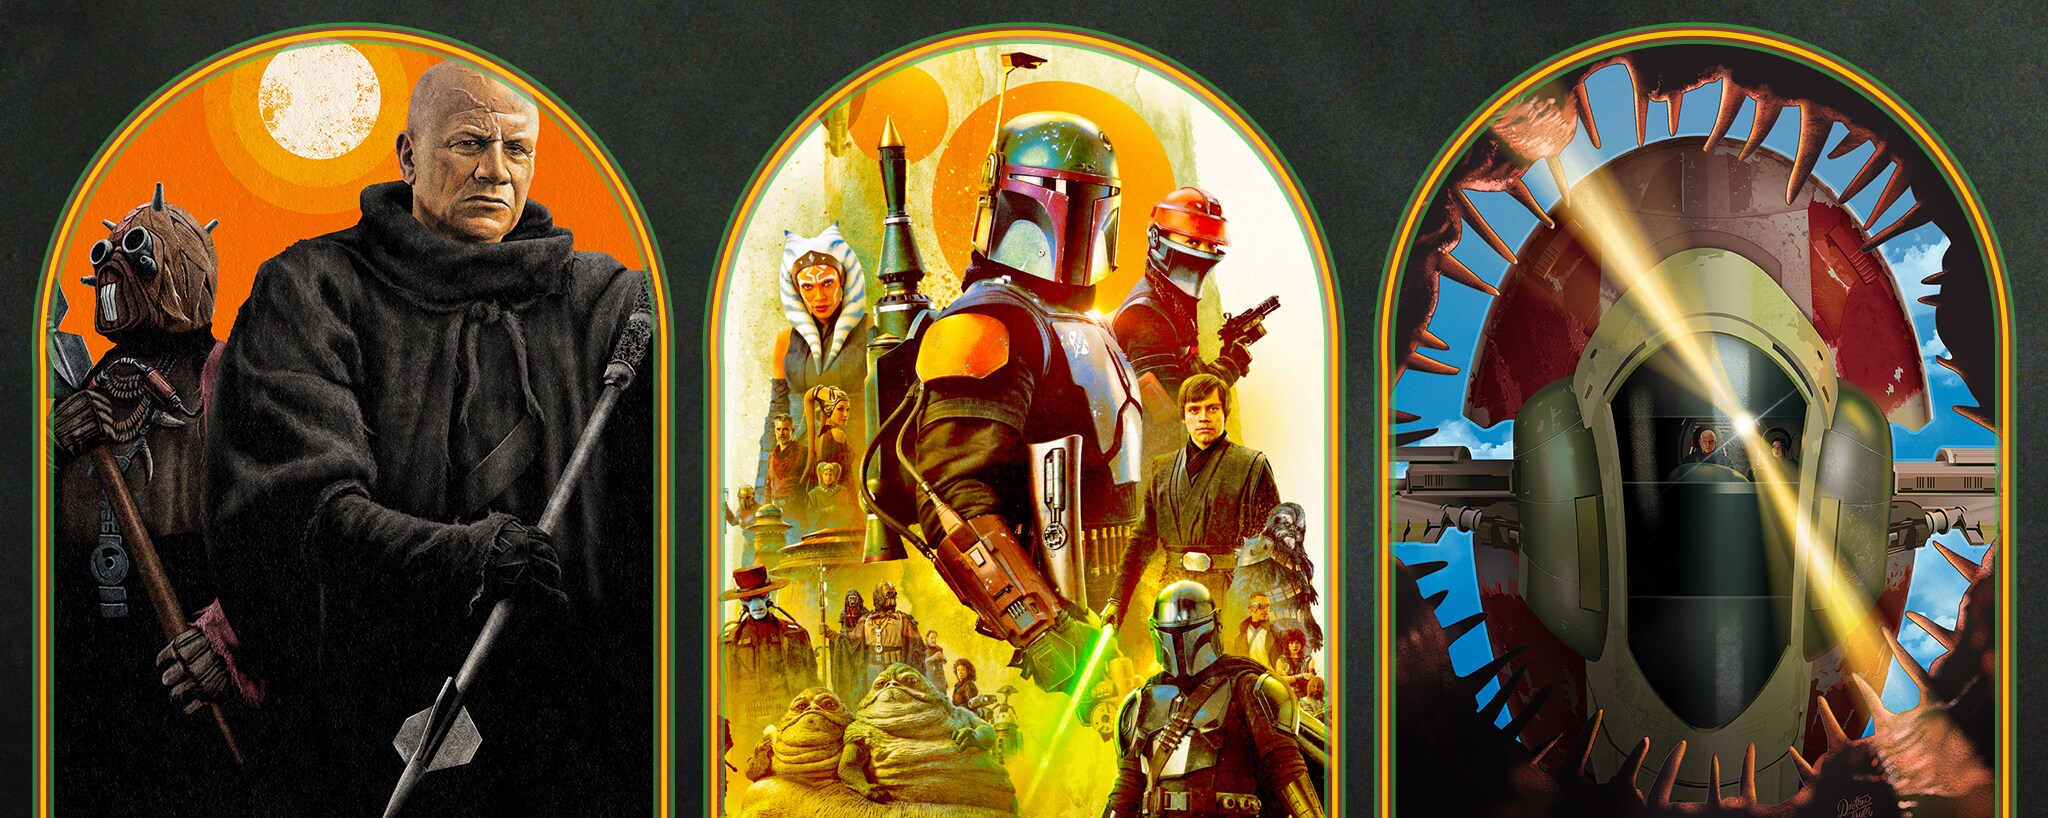 The Book of Boba Fett | Poster Gallery